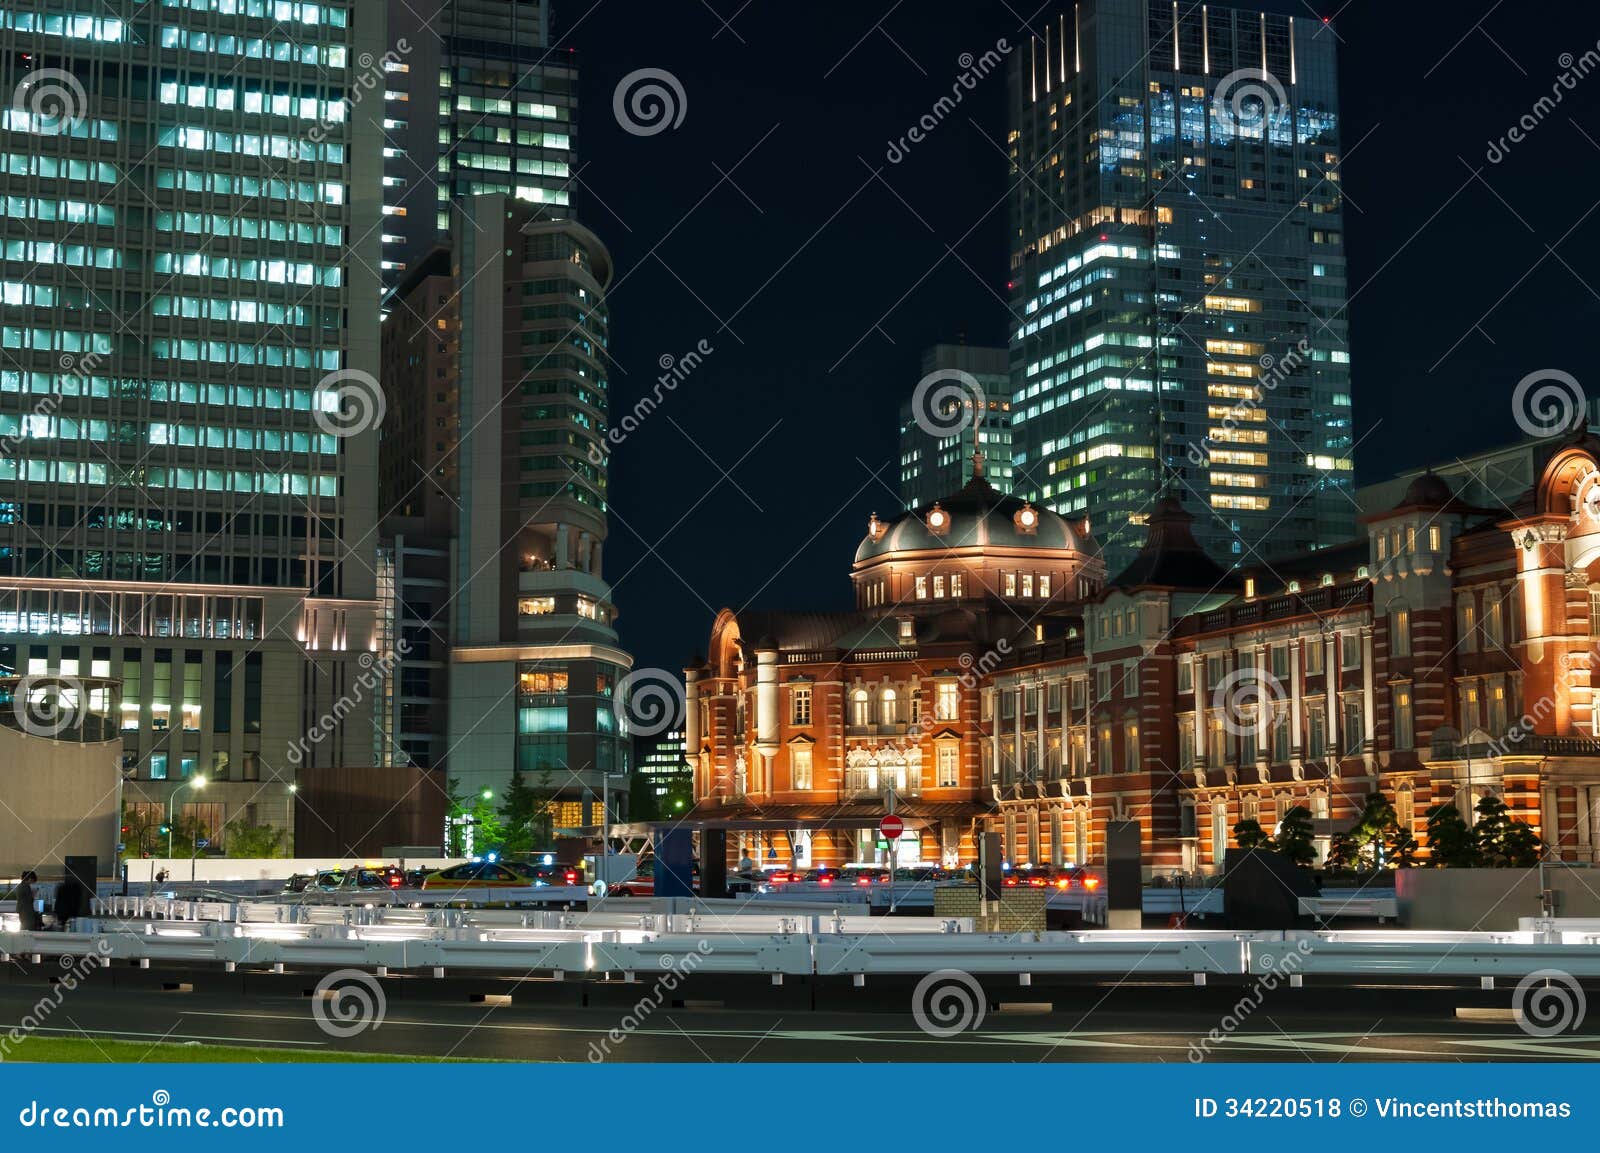 Tokyo Station at night, with the blurred motion of pedestrians and traffic.